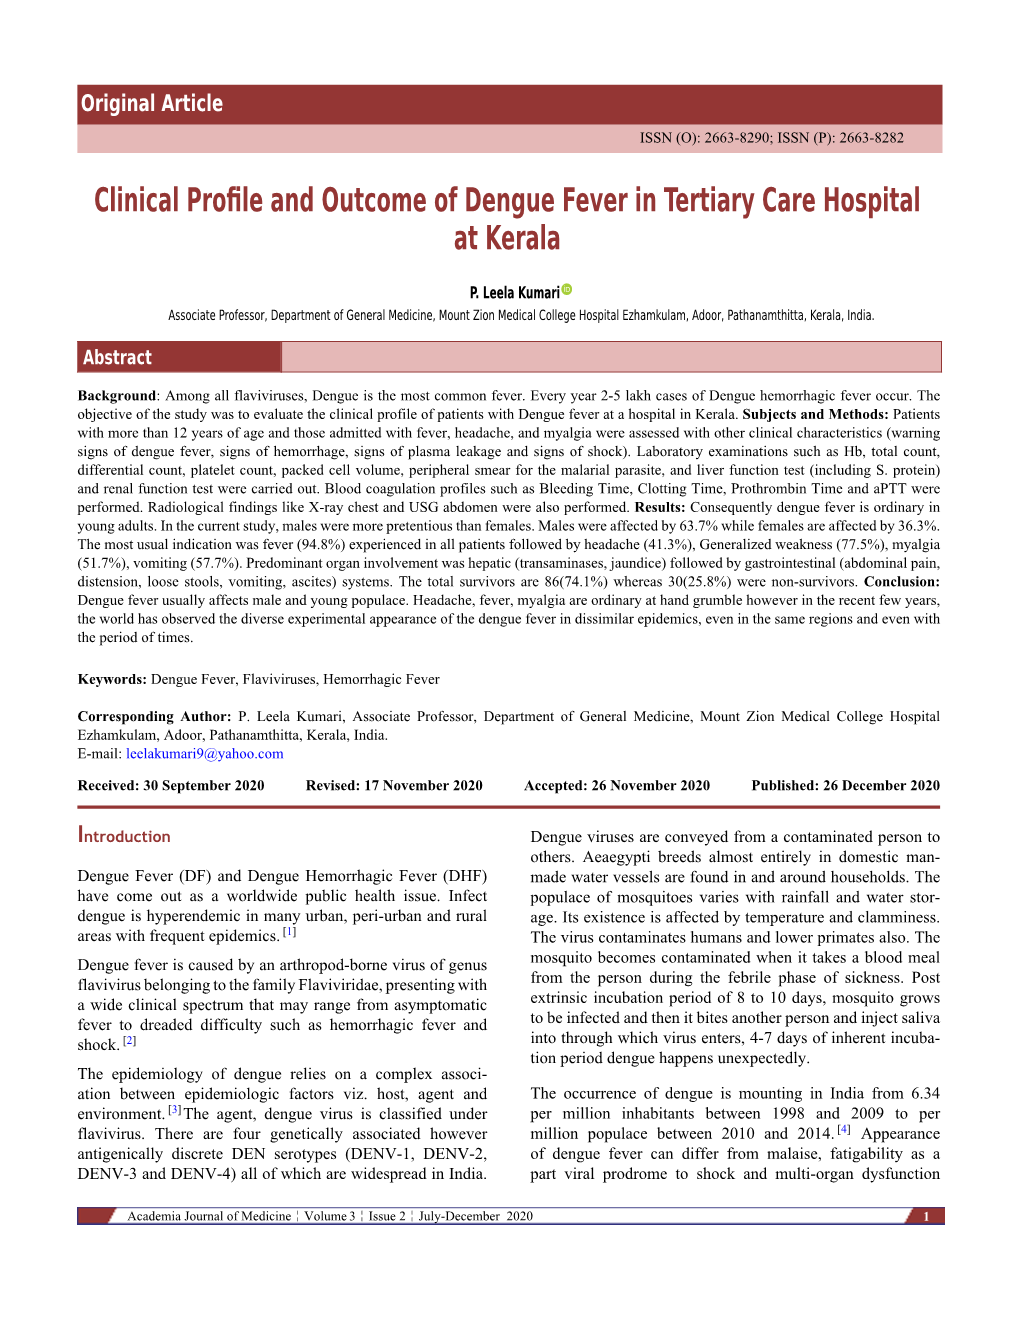 Clinical Profile and Outcome of Dengue Fever in Tertiary Care